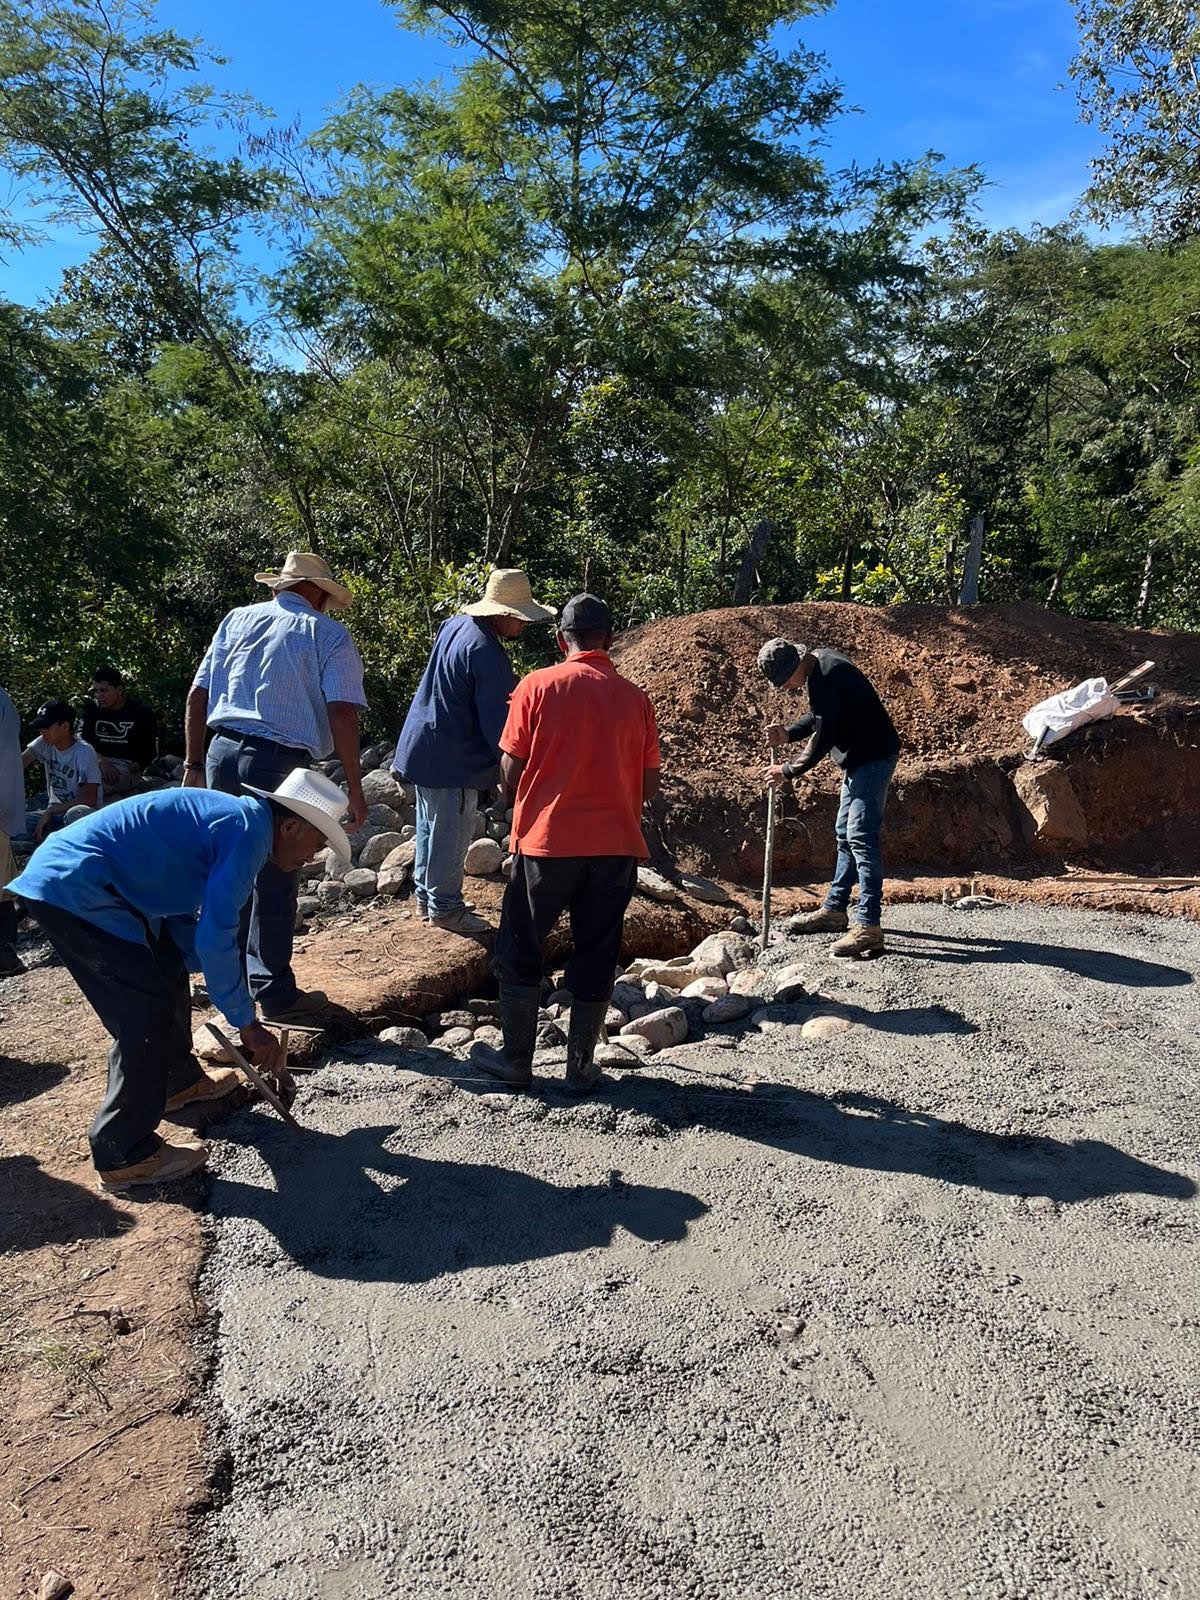 Community members working with a hired mason to build the sub-base for the tank foundation to be built upon.